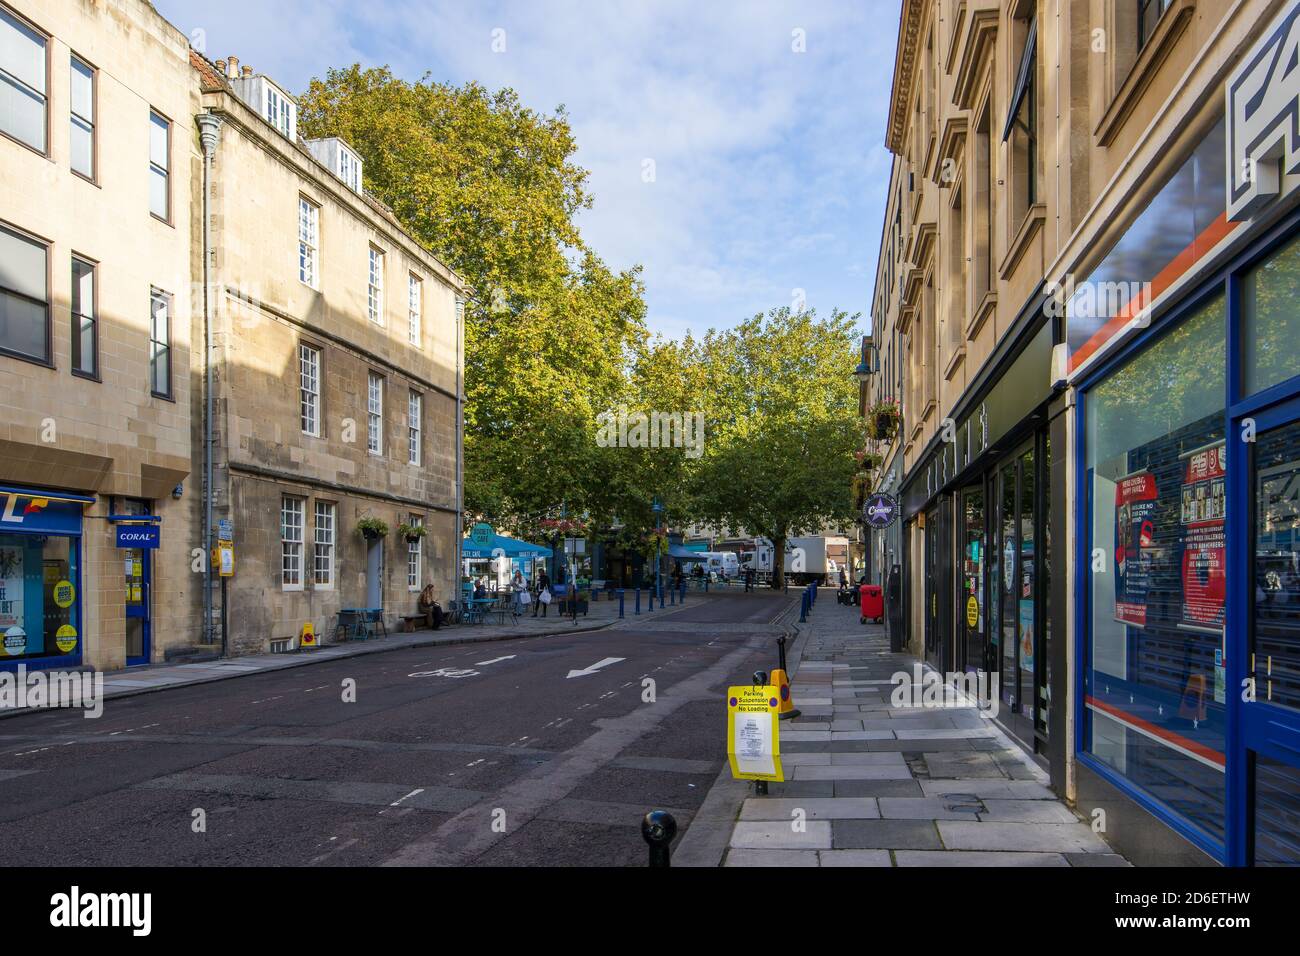 A View up Avon Street in Bath, UK, Looking up towards Kingsmead Square. Stock Photo